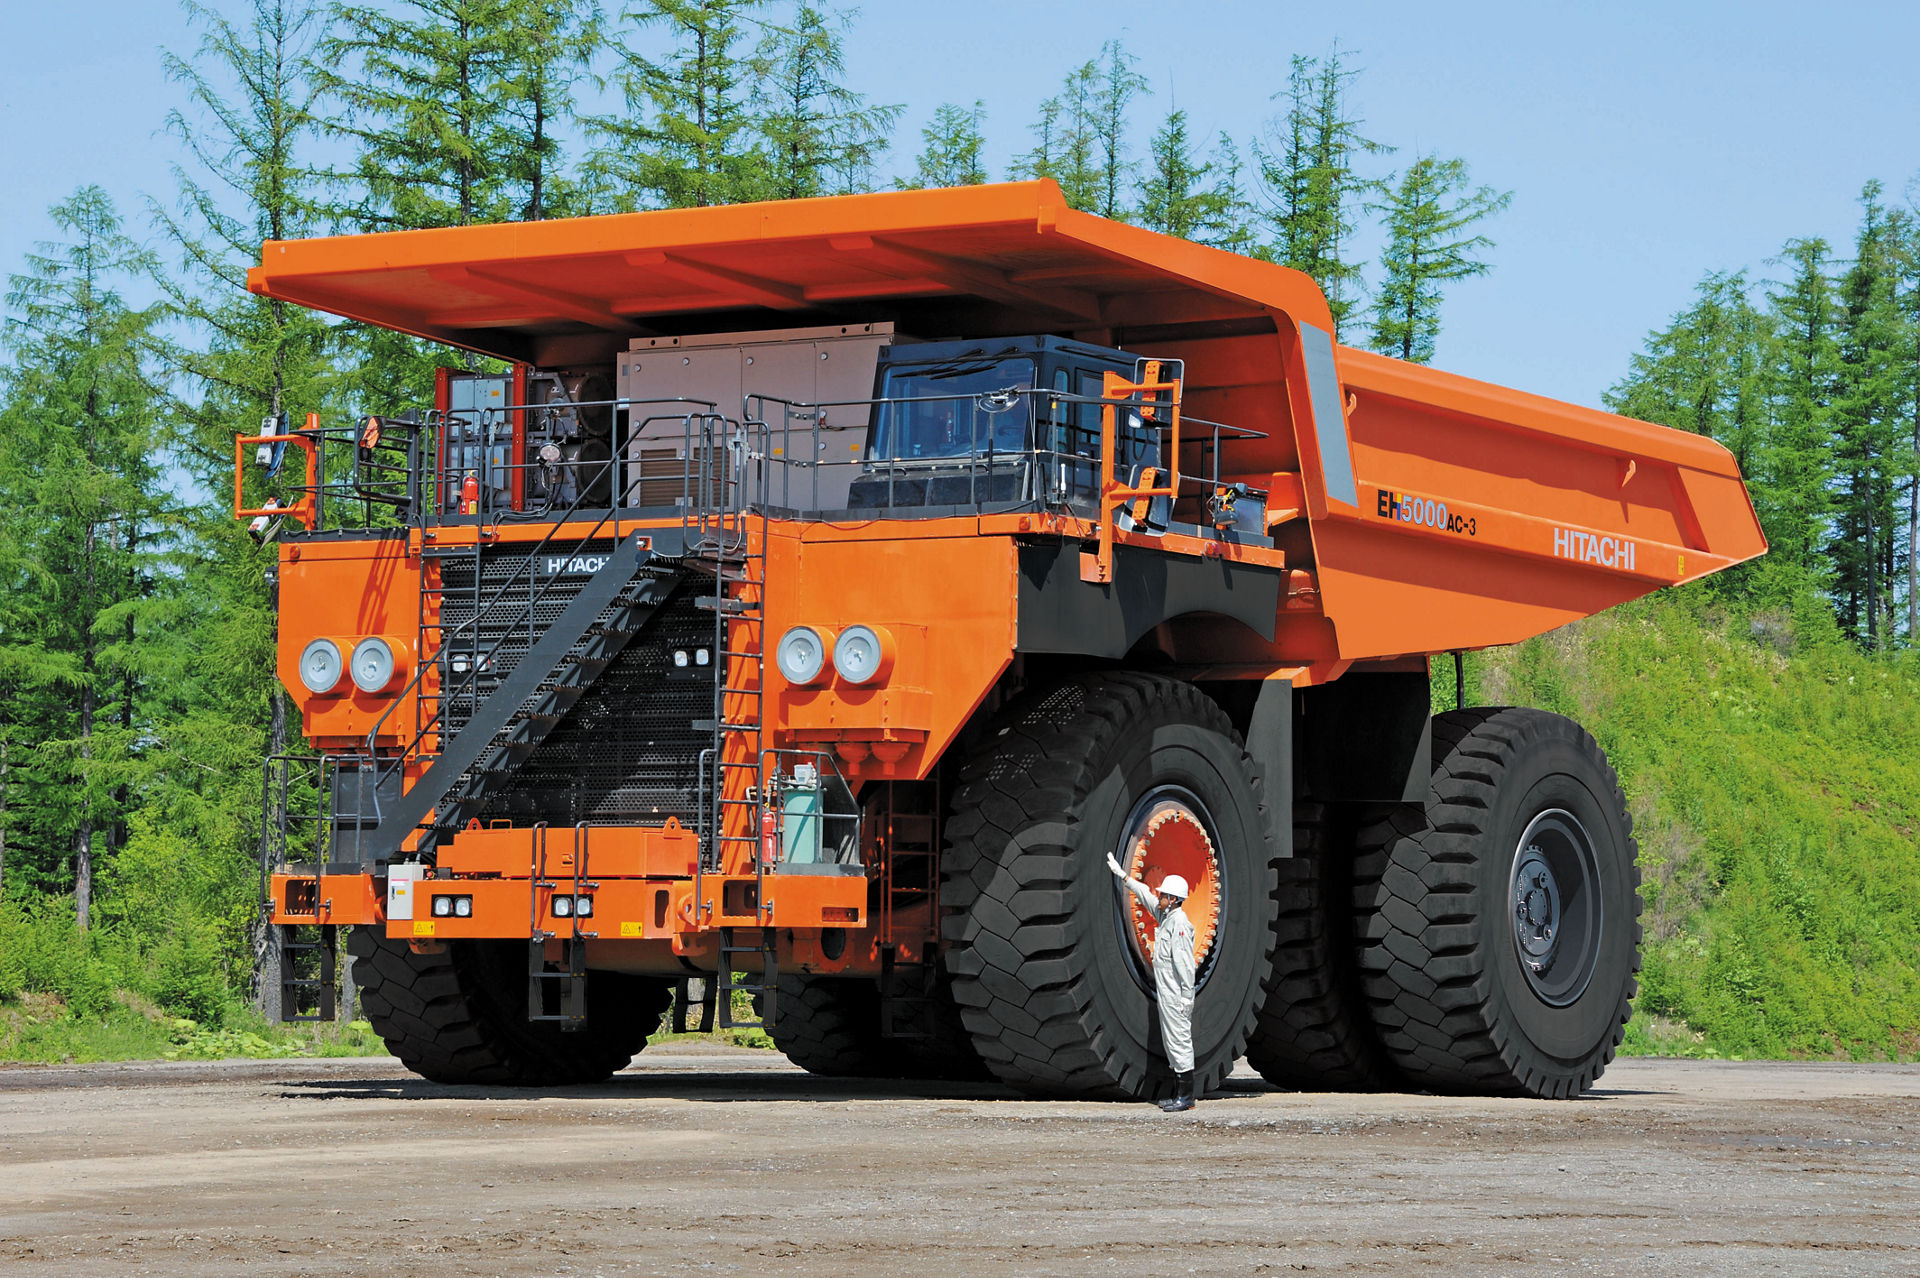 Launched EH5000AC-3, one of the largest Japanese-made rigid dump trucks that is equipped with Advanced Vehicle Stabilization Controls.